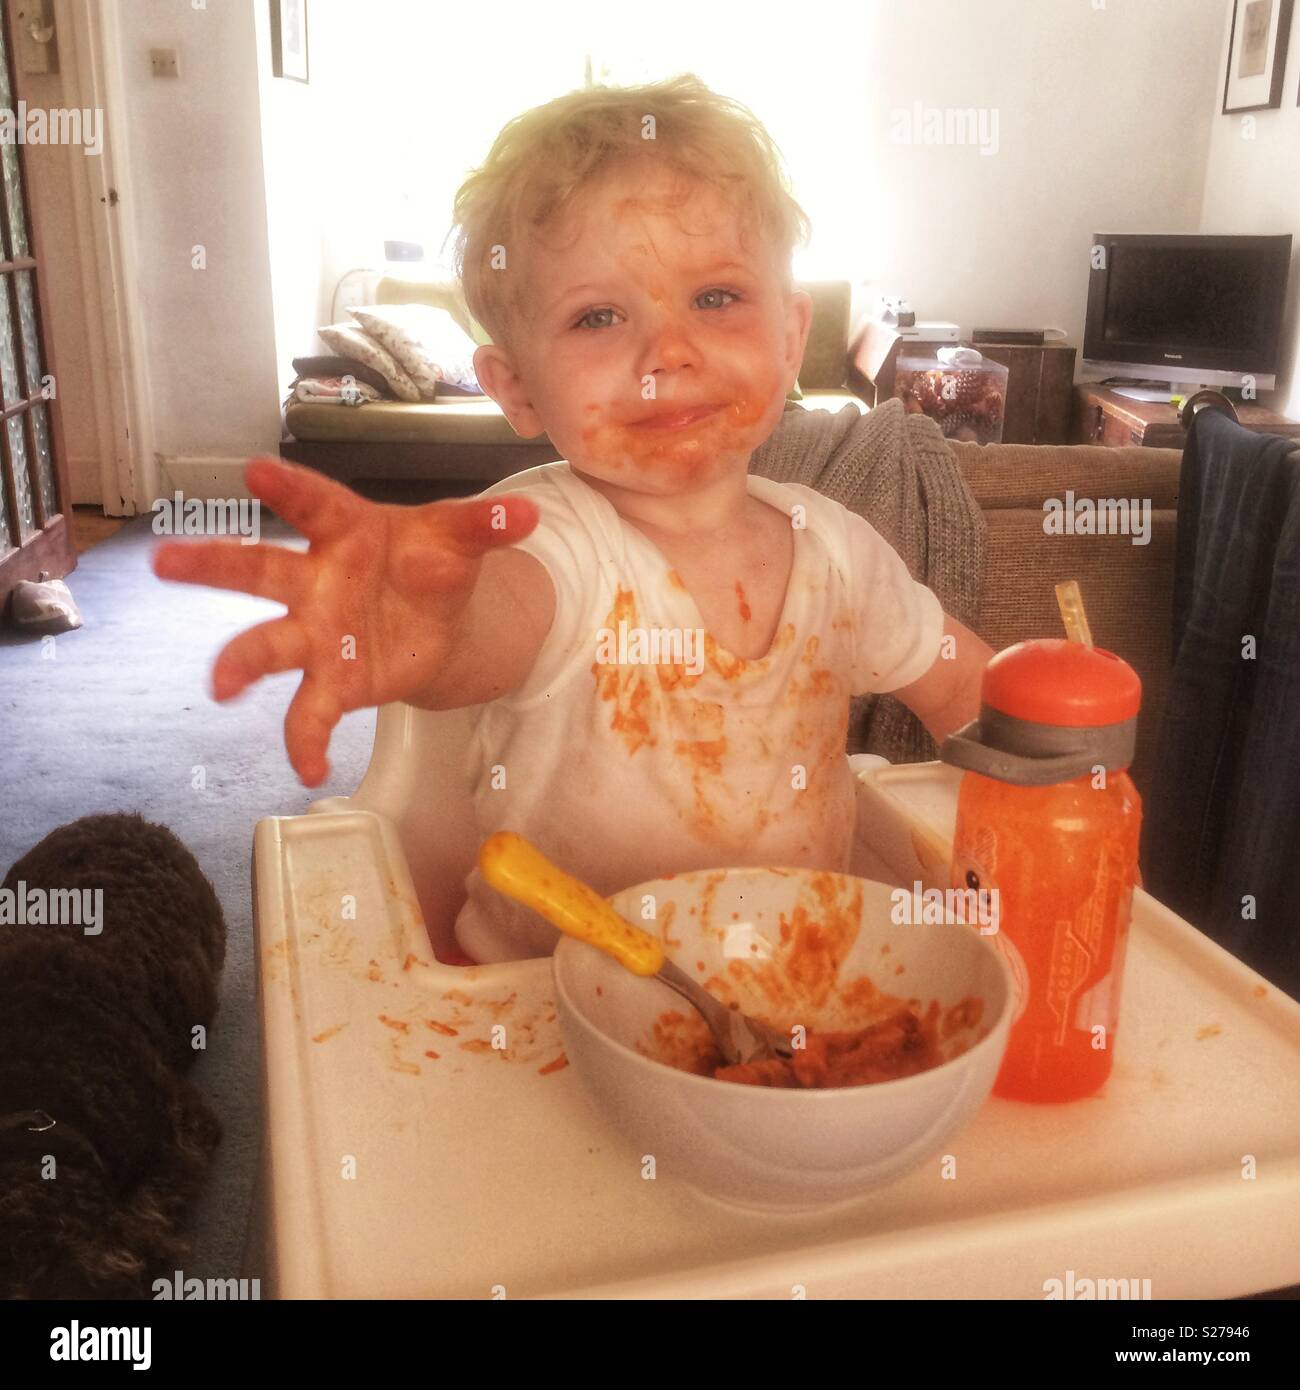 One year old baby boy eating pasta messily. Stock Photo